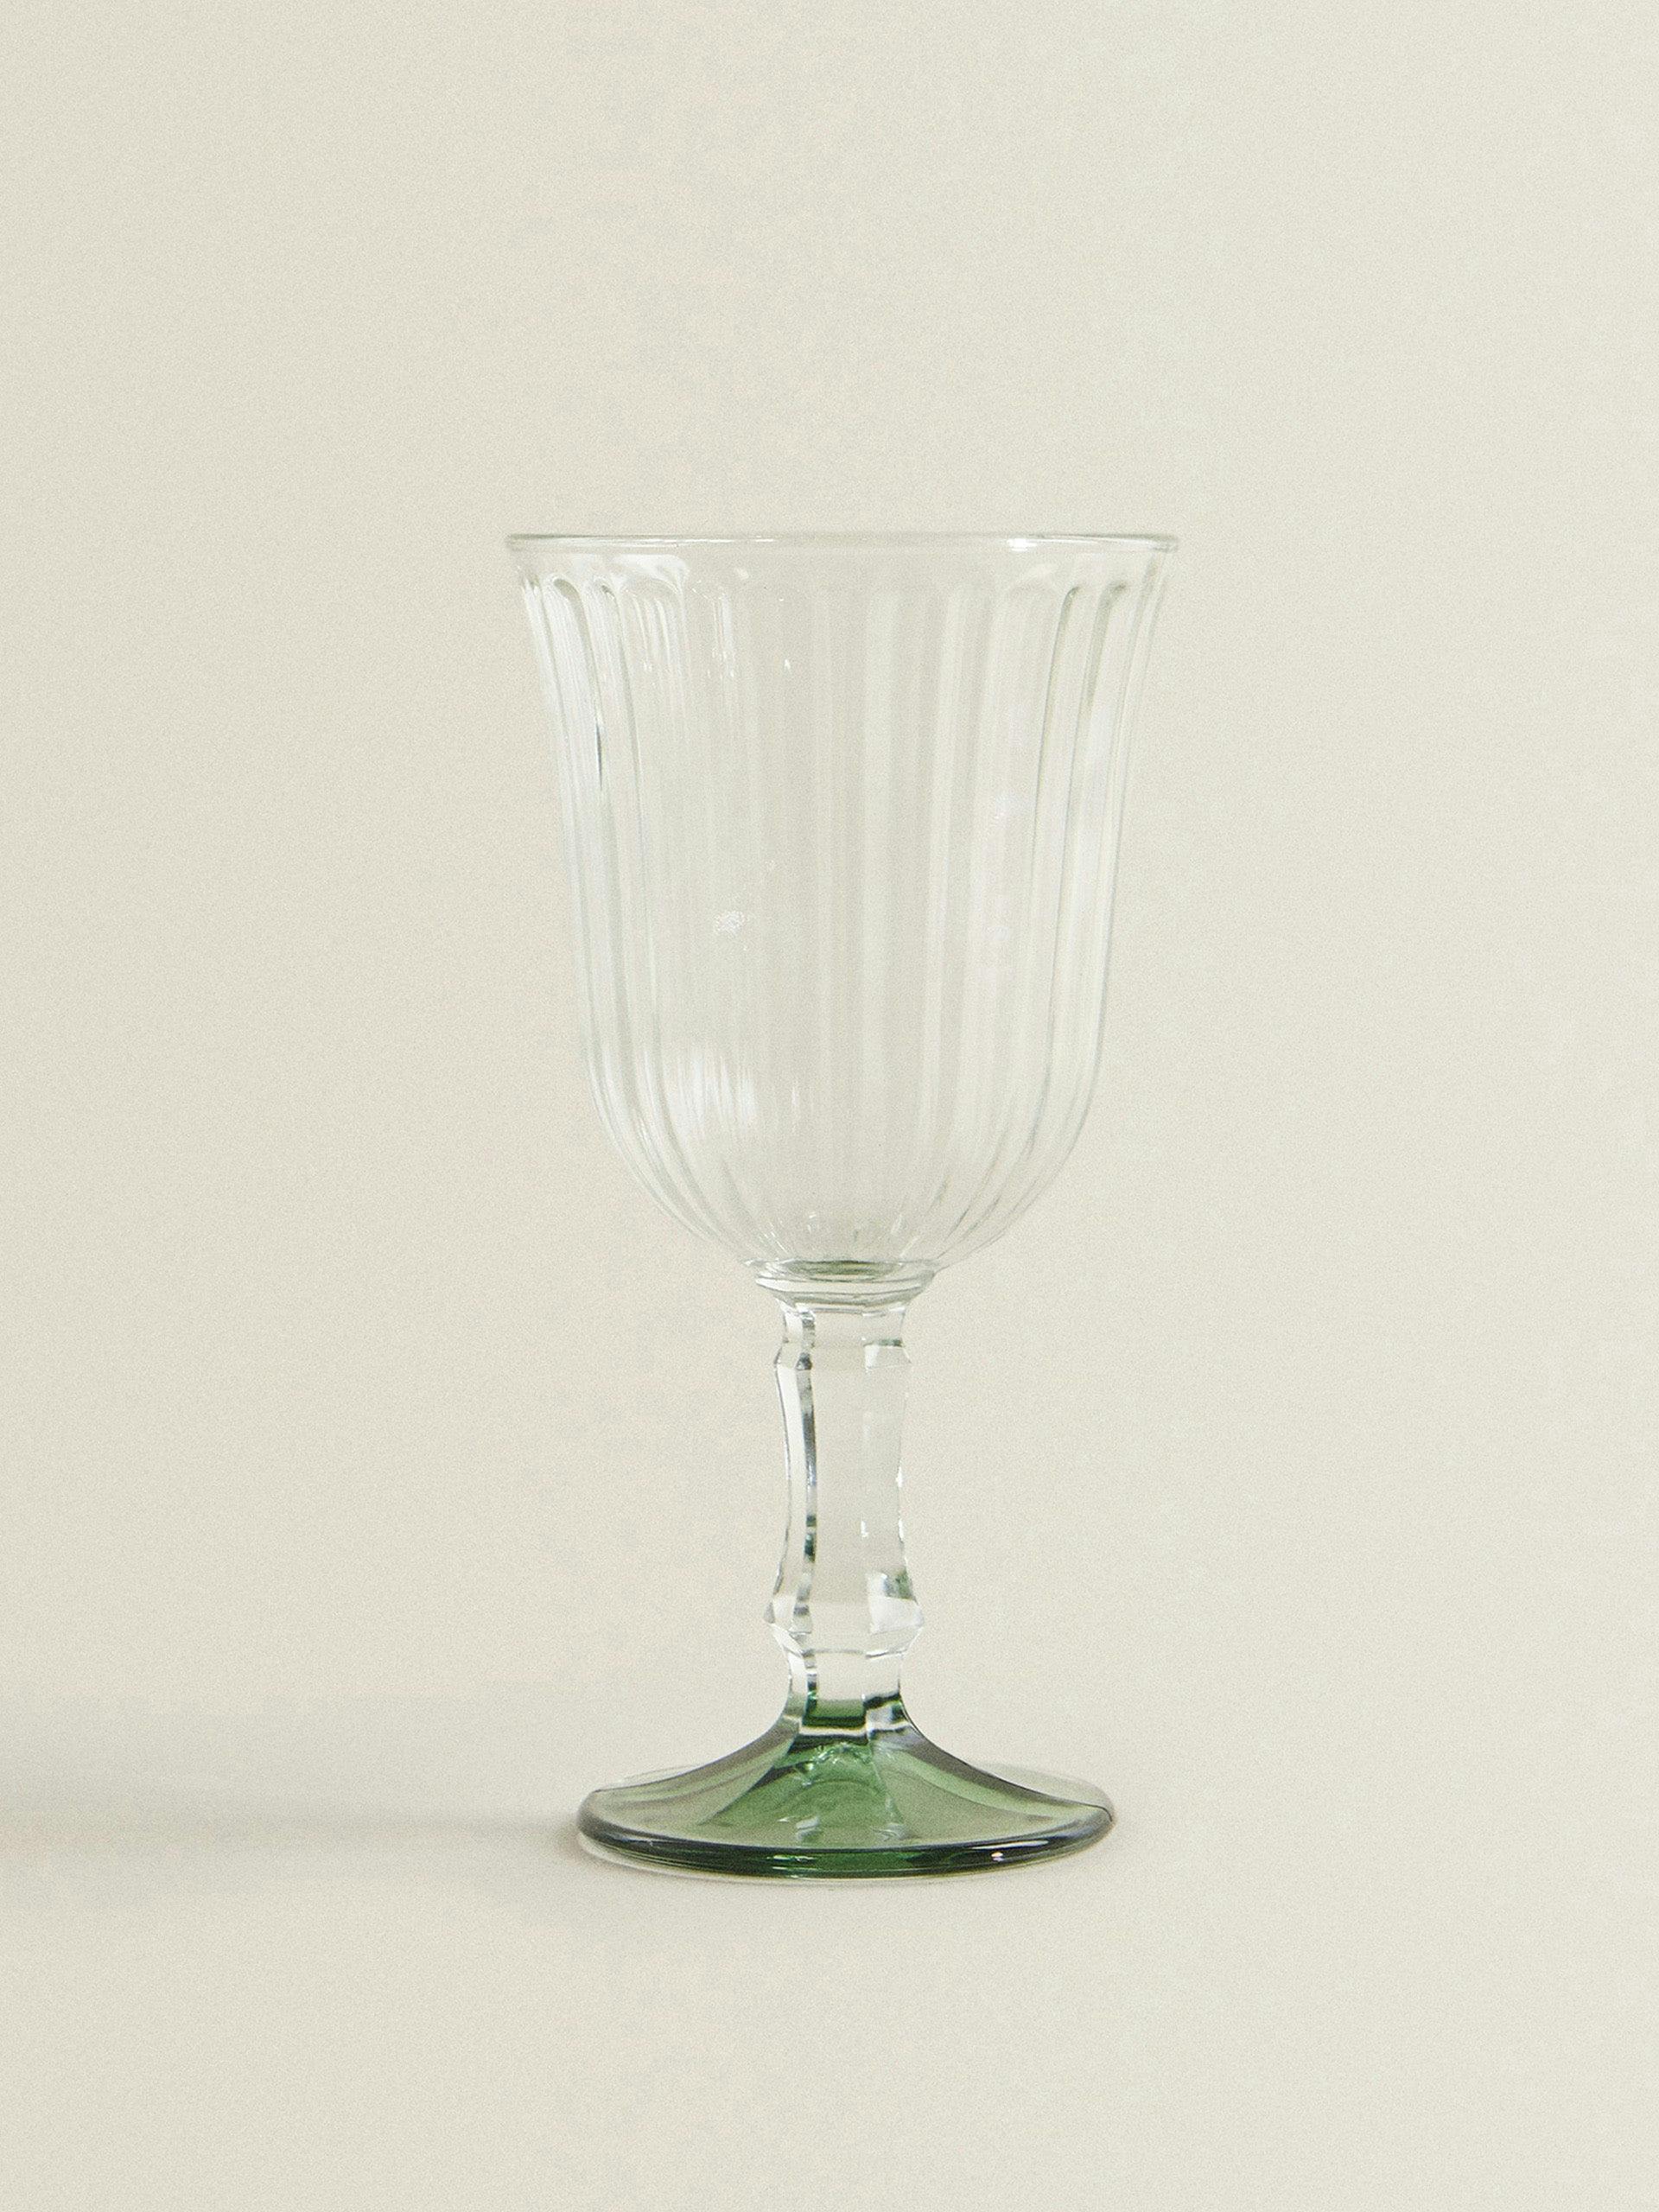 Glass goblet with green base